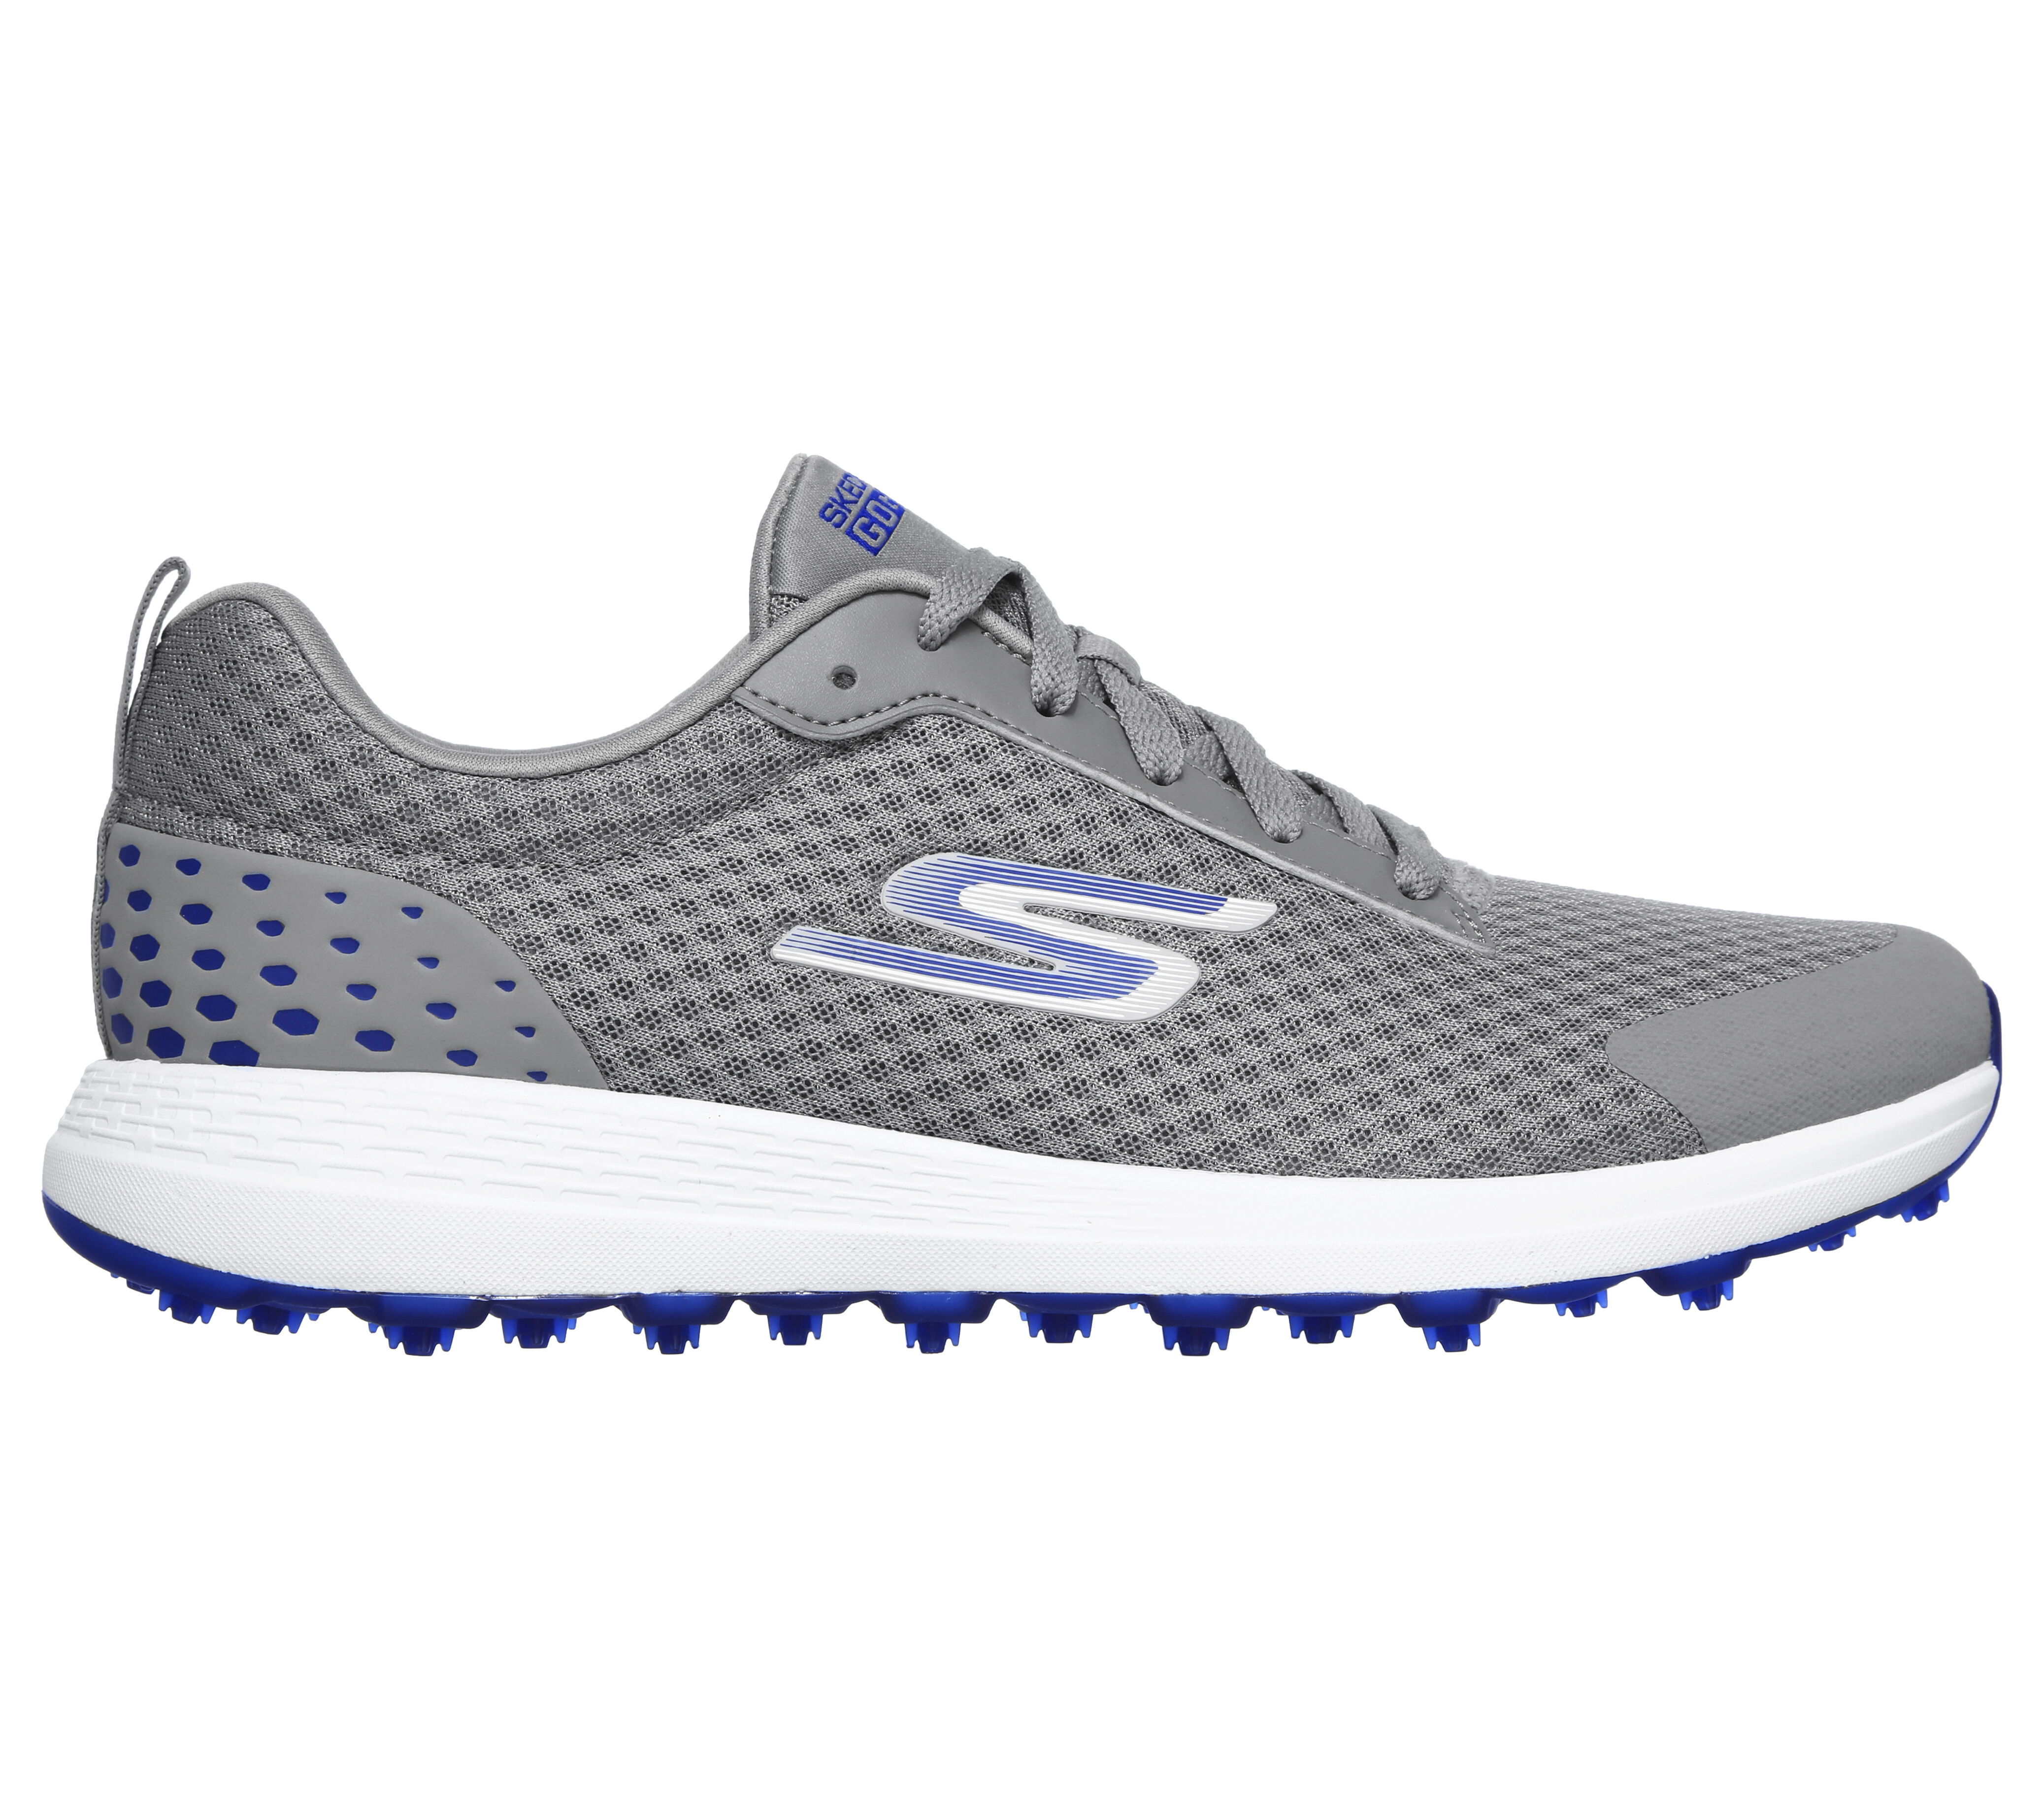 stores that sell skechers golf shoes